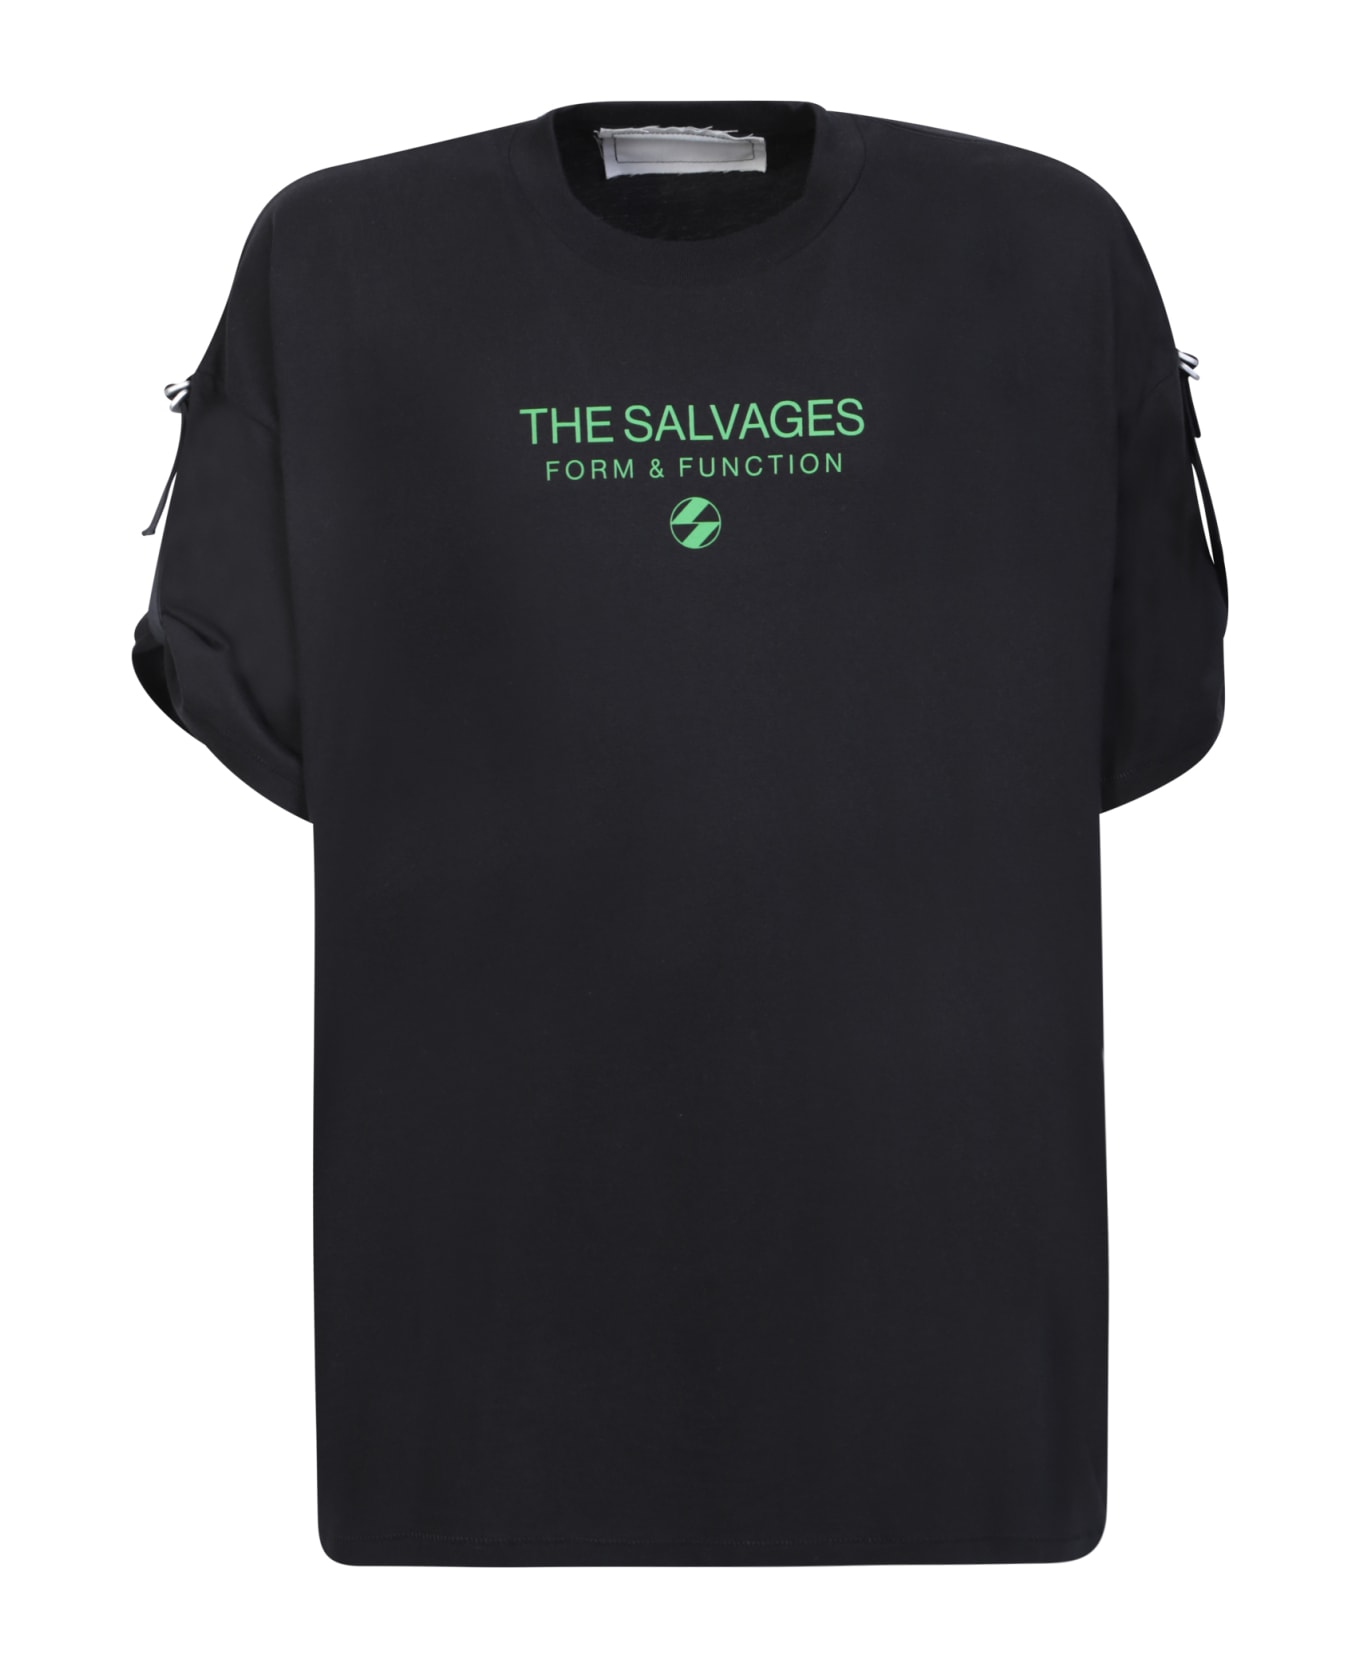 The Salvages From & Function D-ring Black T-shirt - Black シャツ